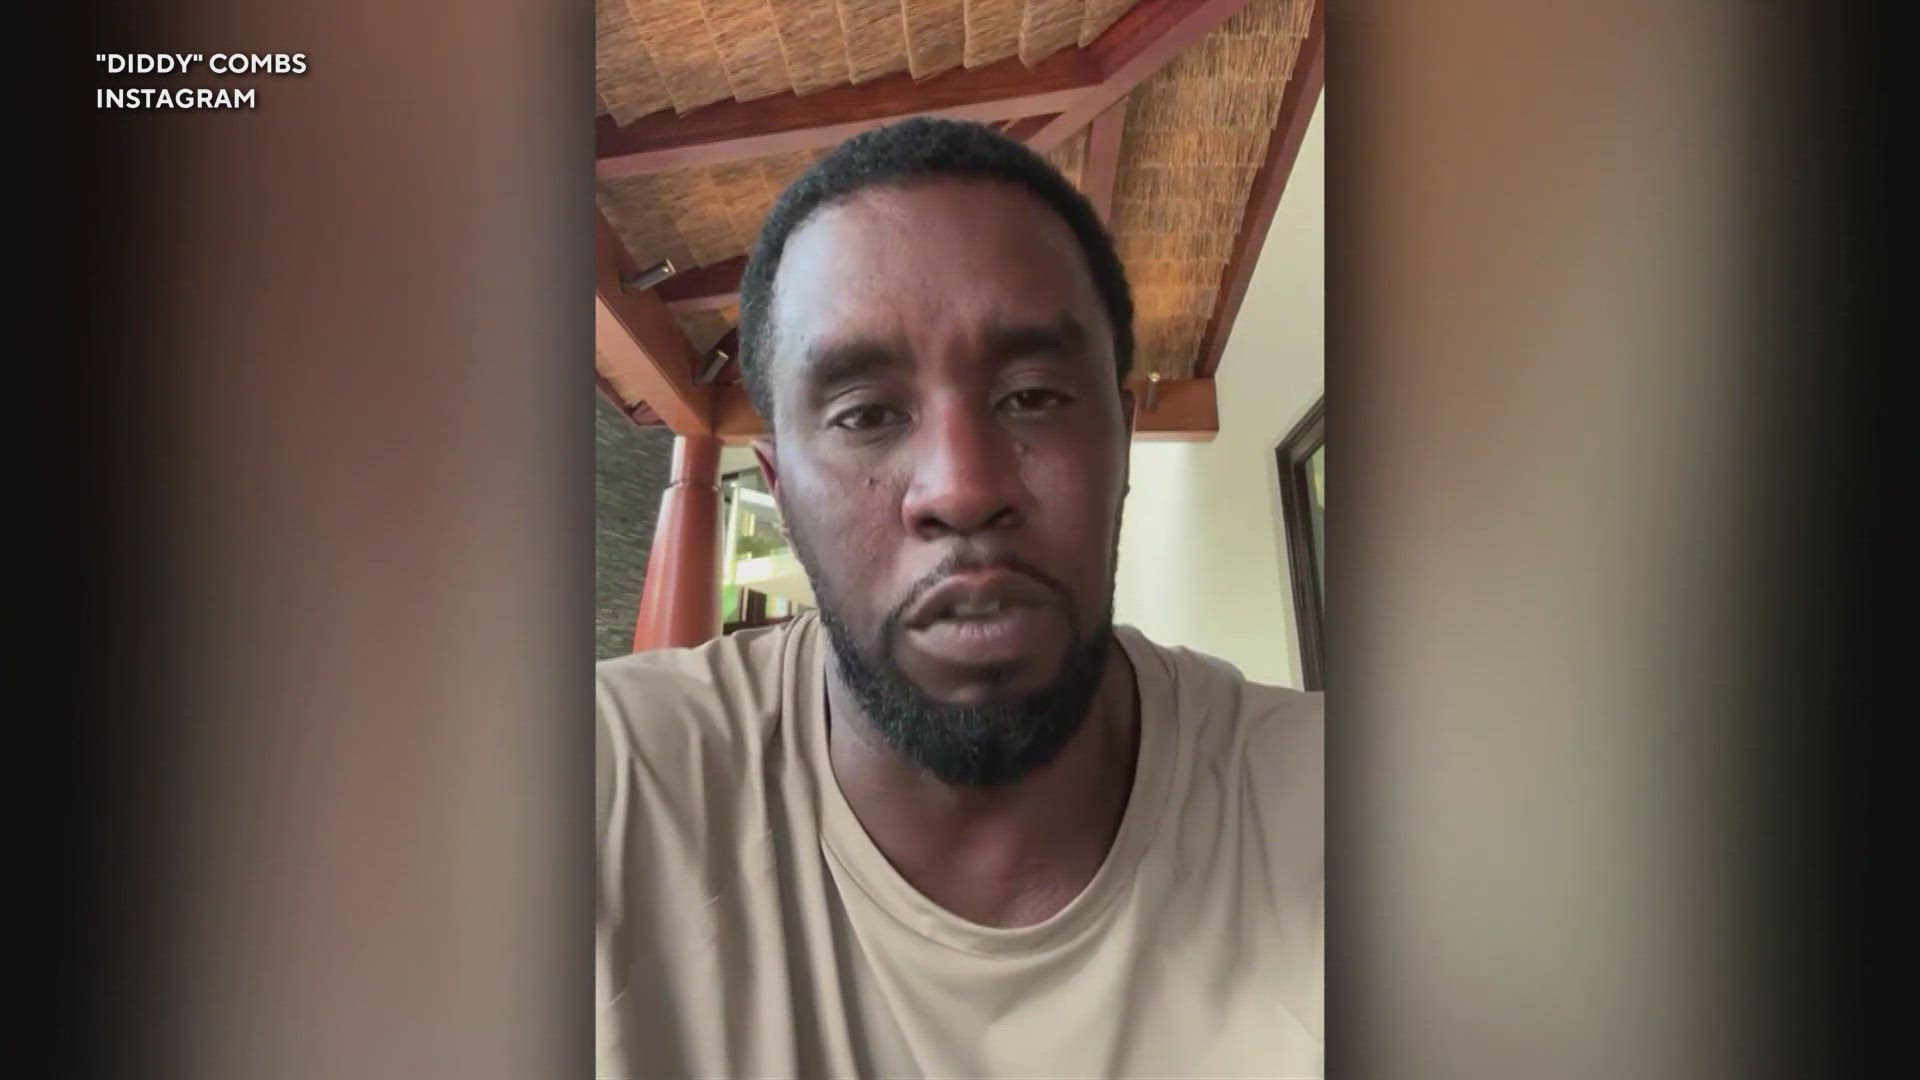 Sean “Diddy” Combs admitted that he beat his ex-girlfriend Cassie in a hotel hallway in 2016 after CNN released video of the attack.